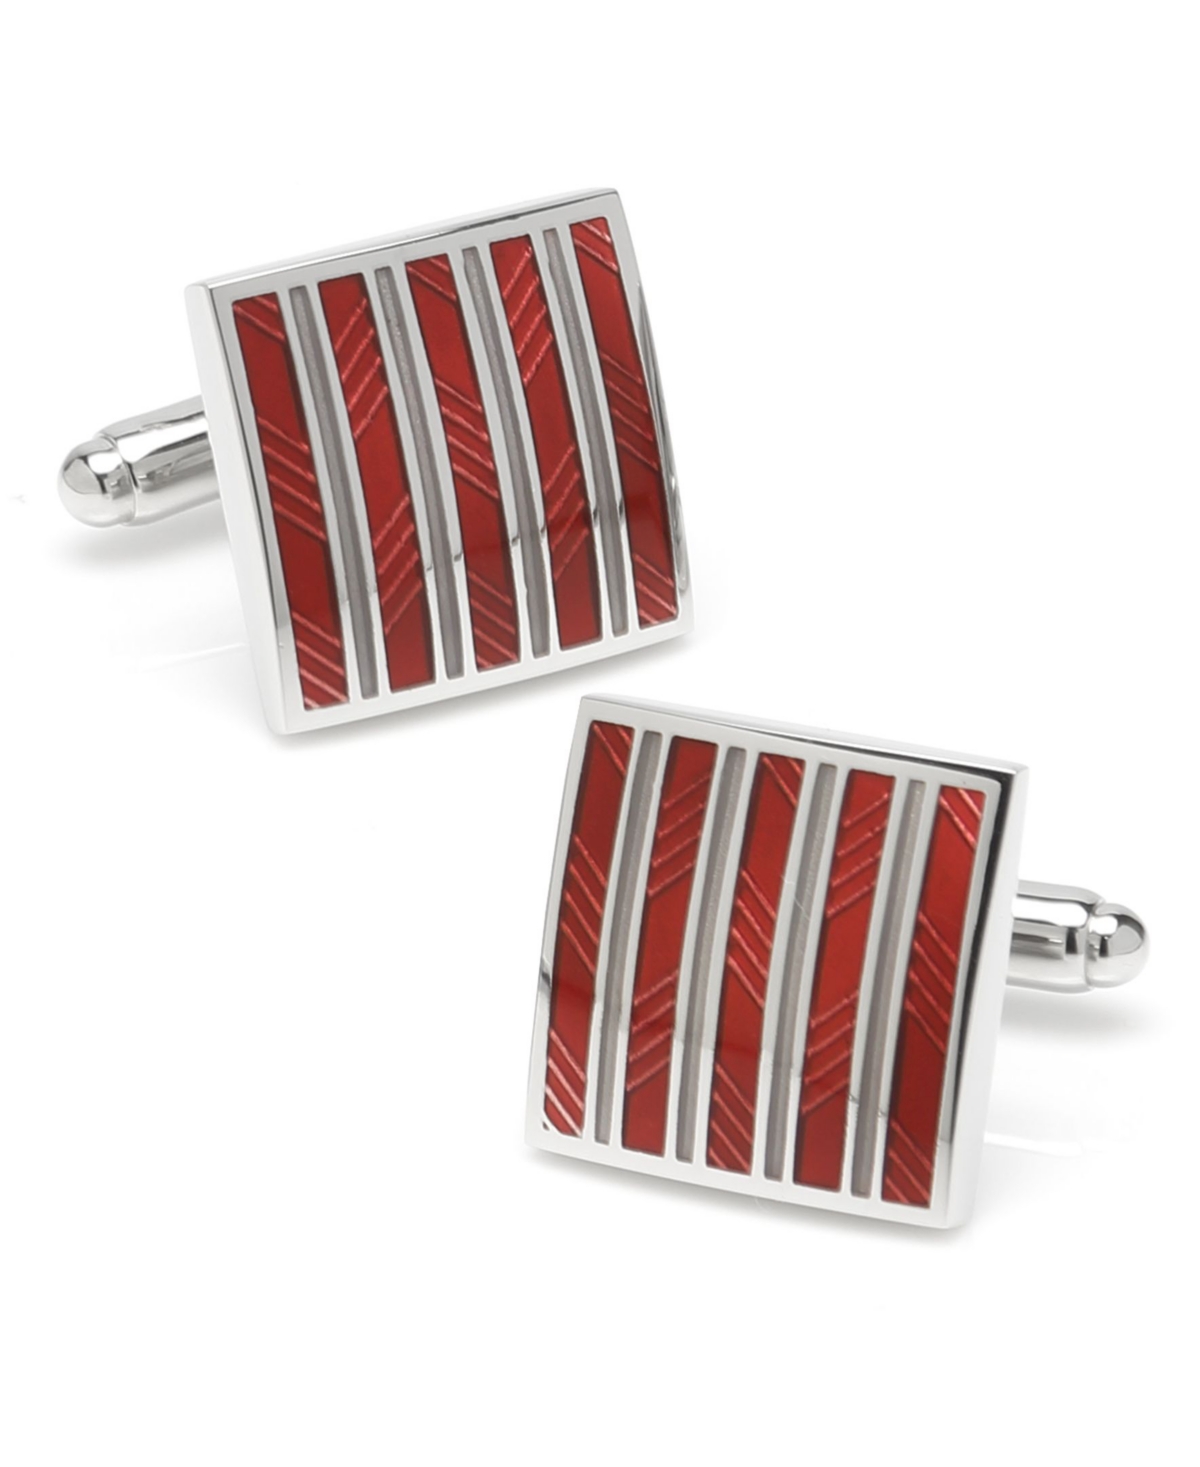 Ox Bull & Trading Co Striped Square Cufflinks - Red